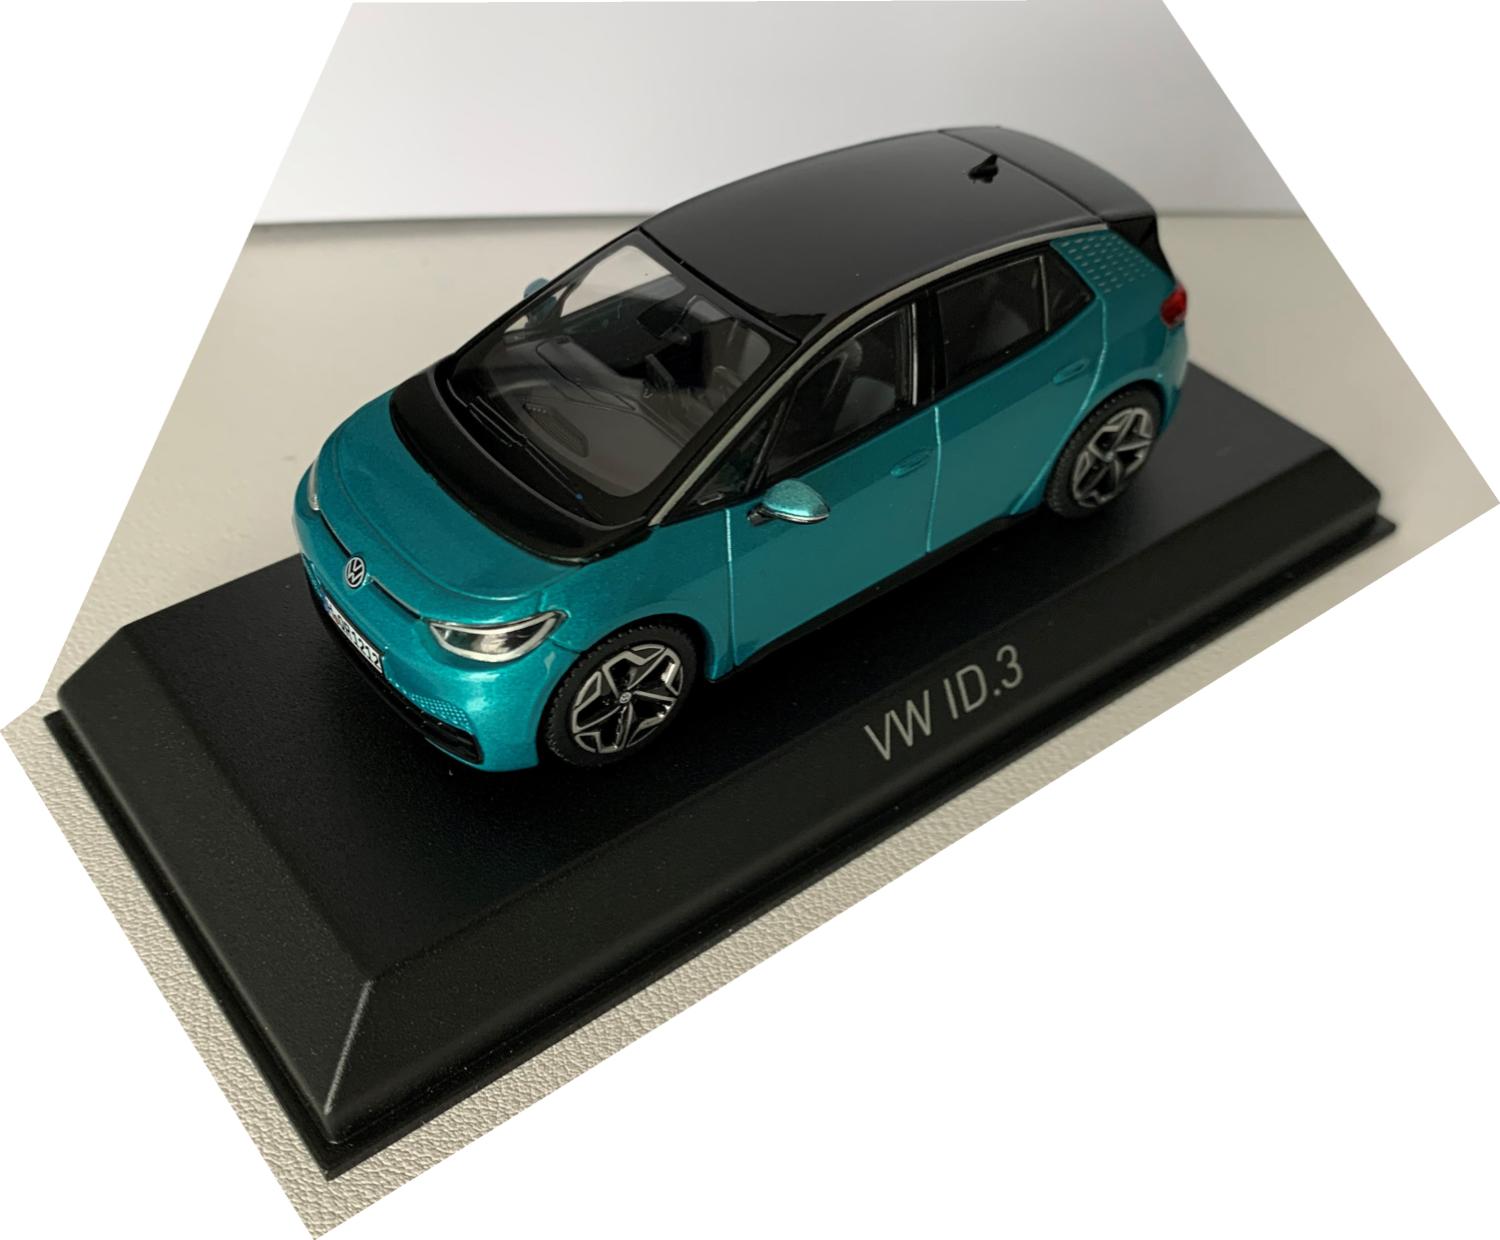 diecast model of Volkswagen electric car, VW ID.3 2020 in turquoise 1:43 scale model from Norev